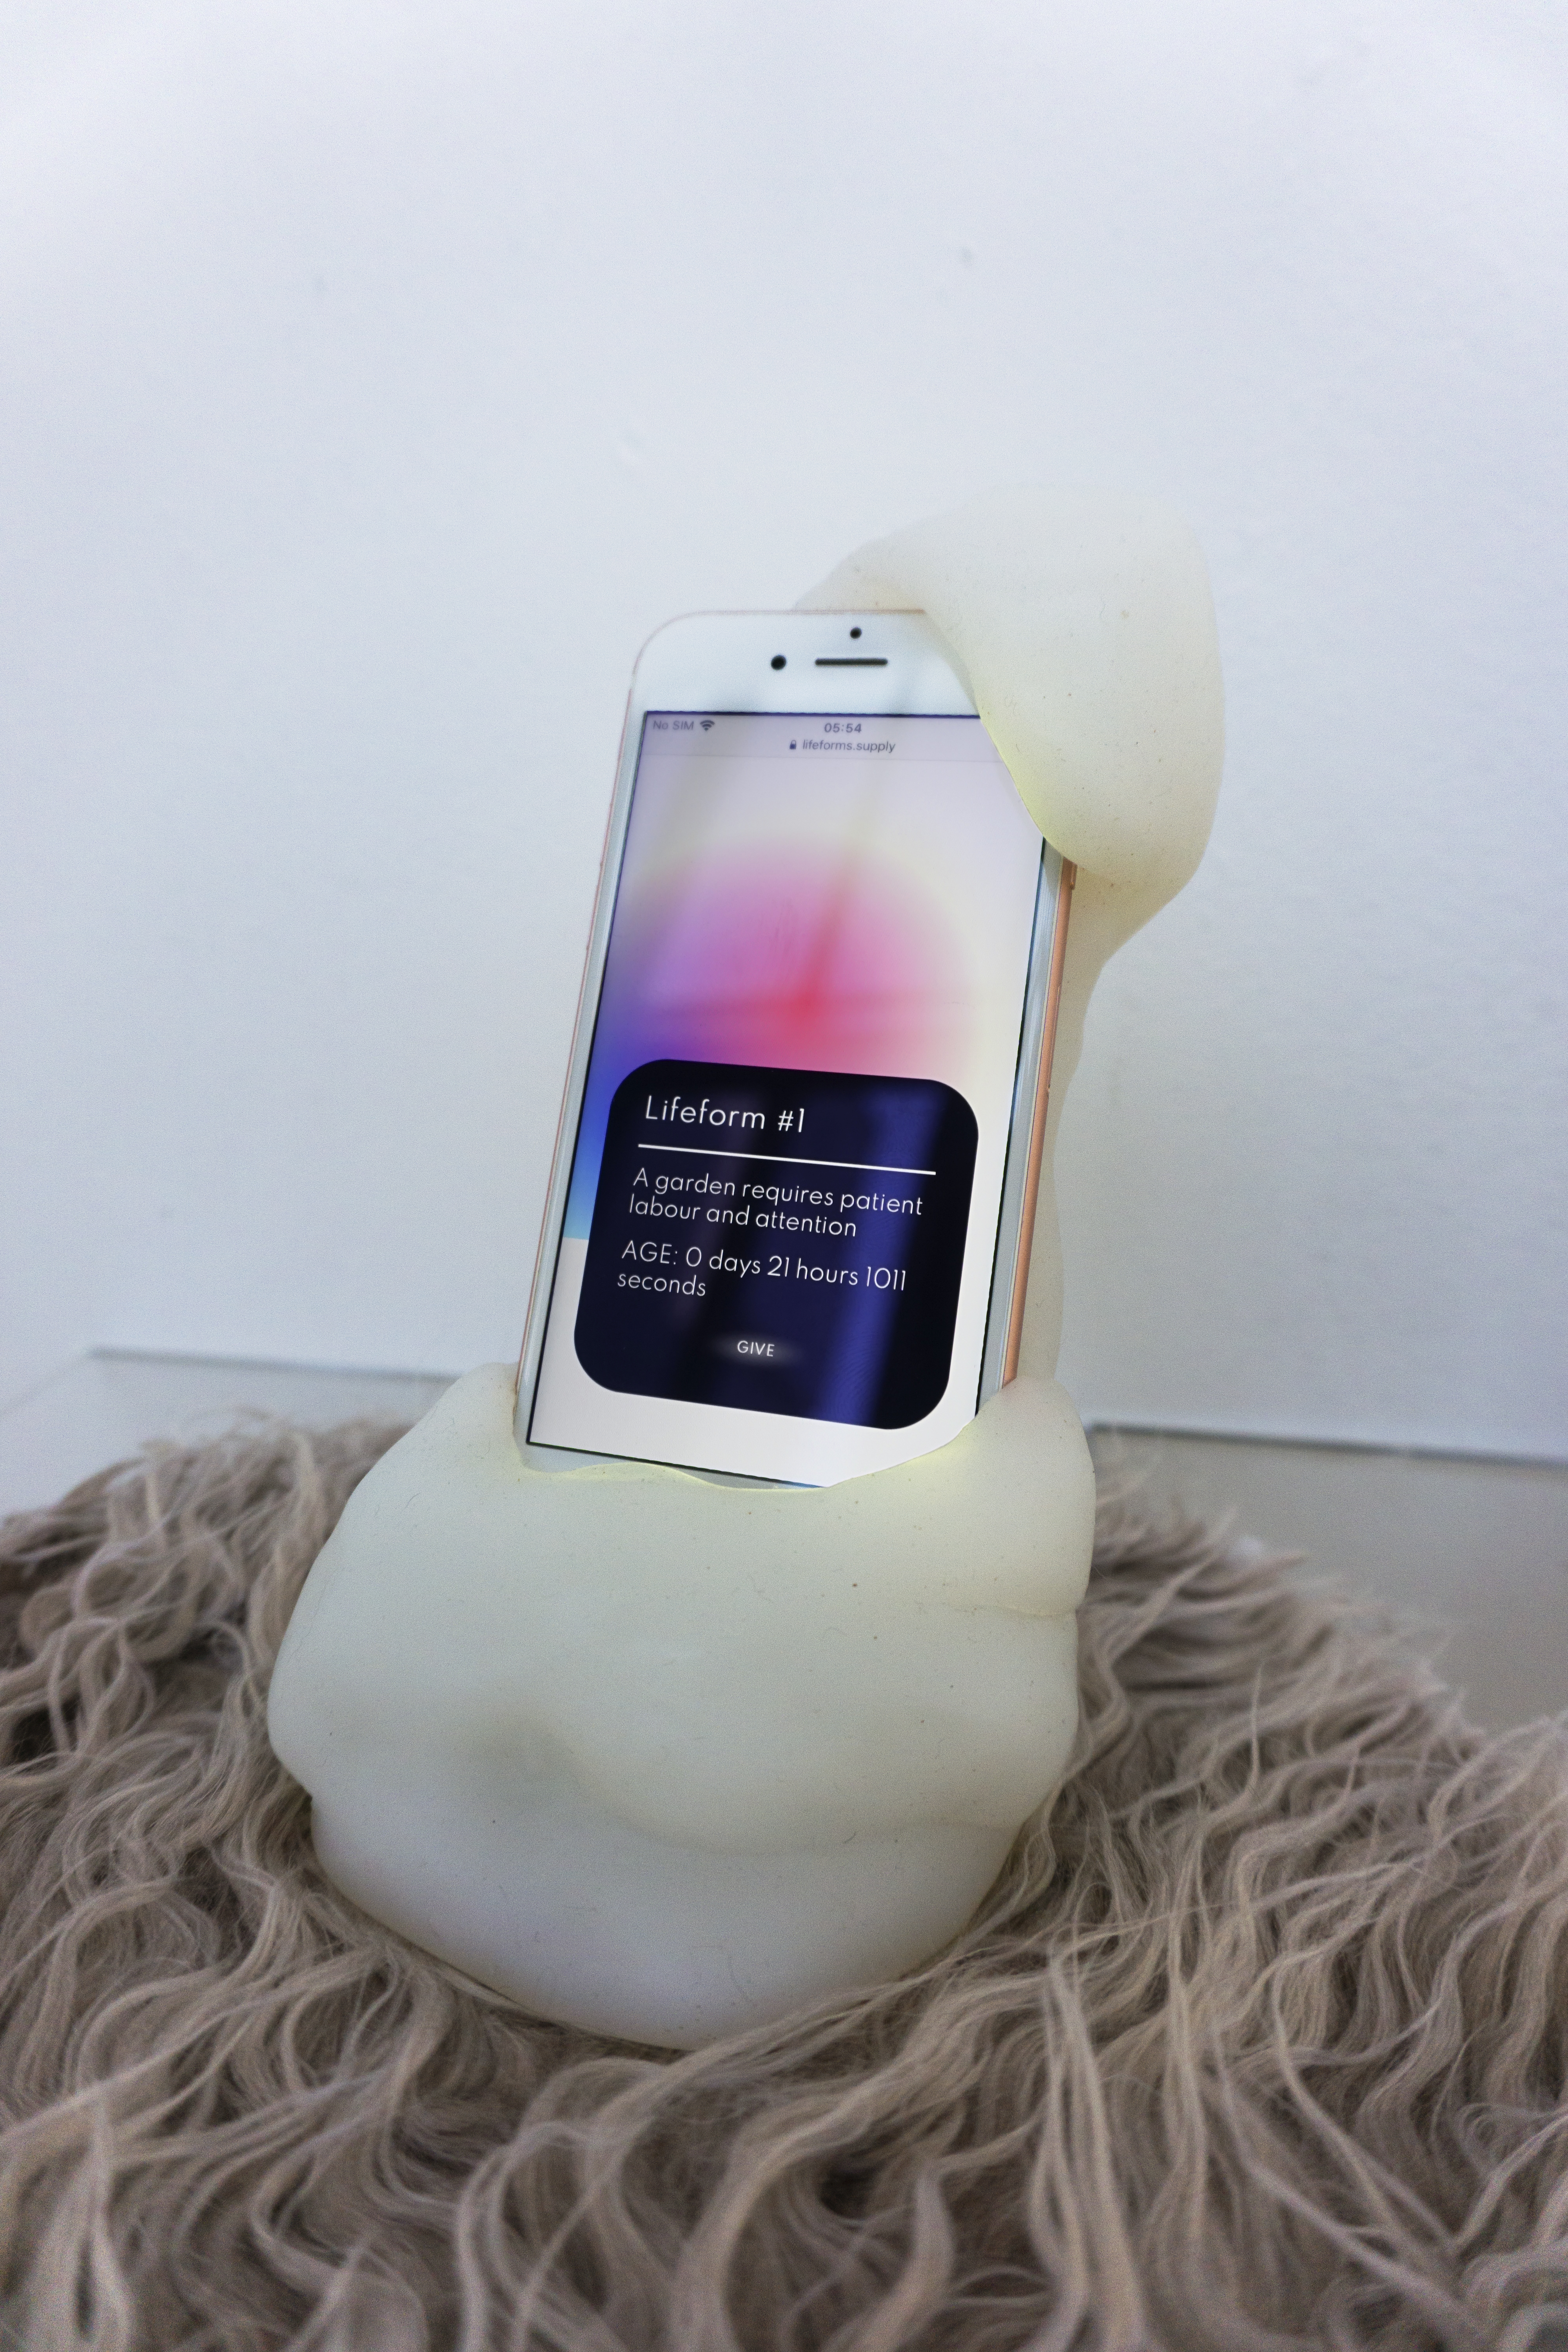 Lifeform 1 physically installed at the Kunstverein in Hamburg. It is a soft translucent silicone form encasing an iphone sitting on a plexiglass shelf